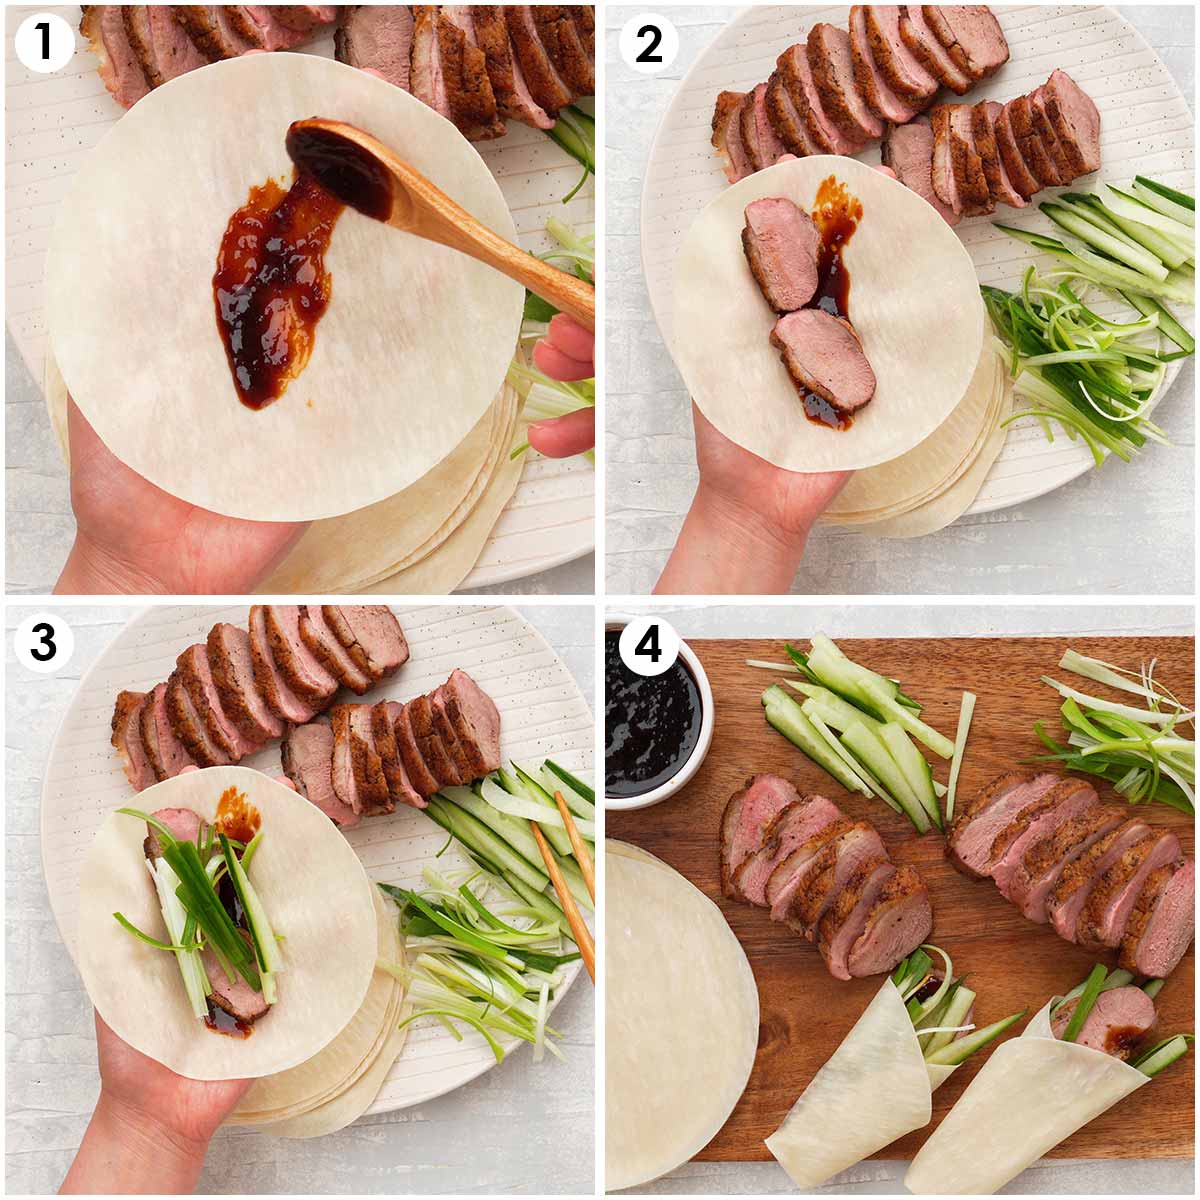 Four image collage showing how to prepare hoisin duck with pan cake.